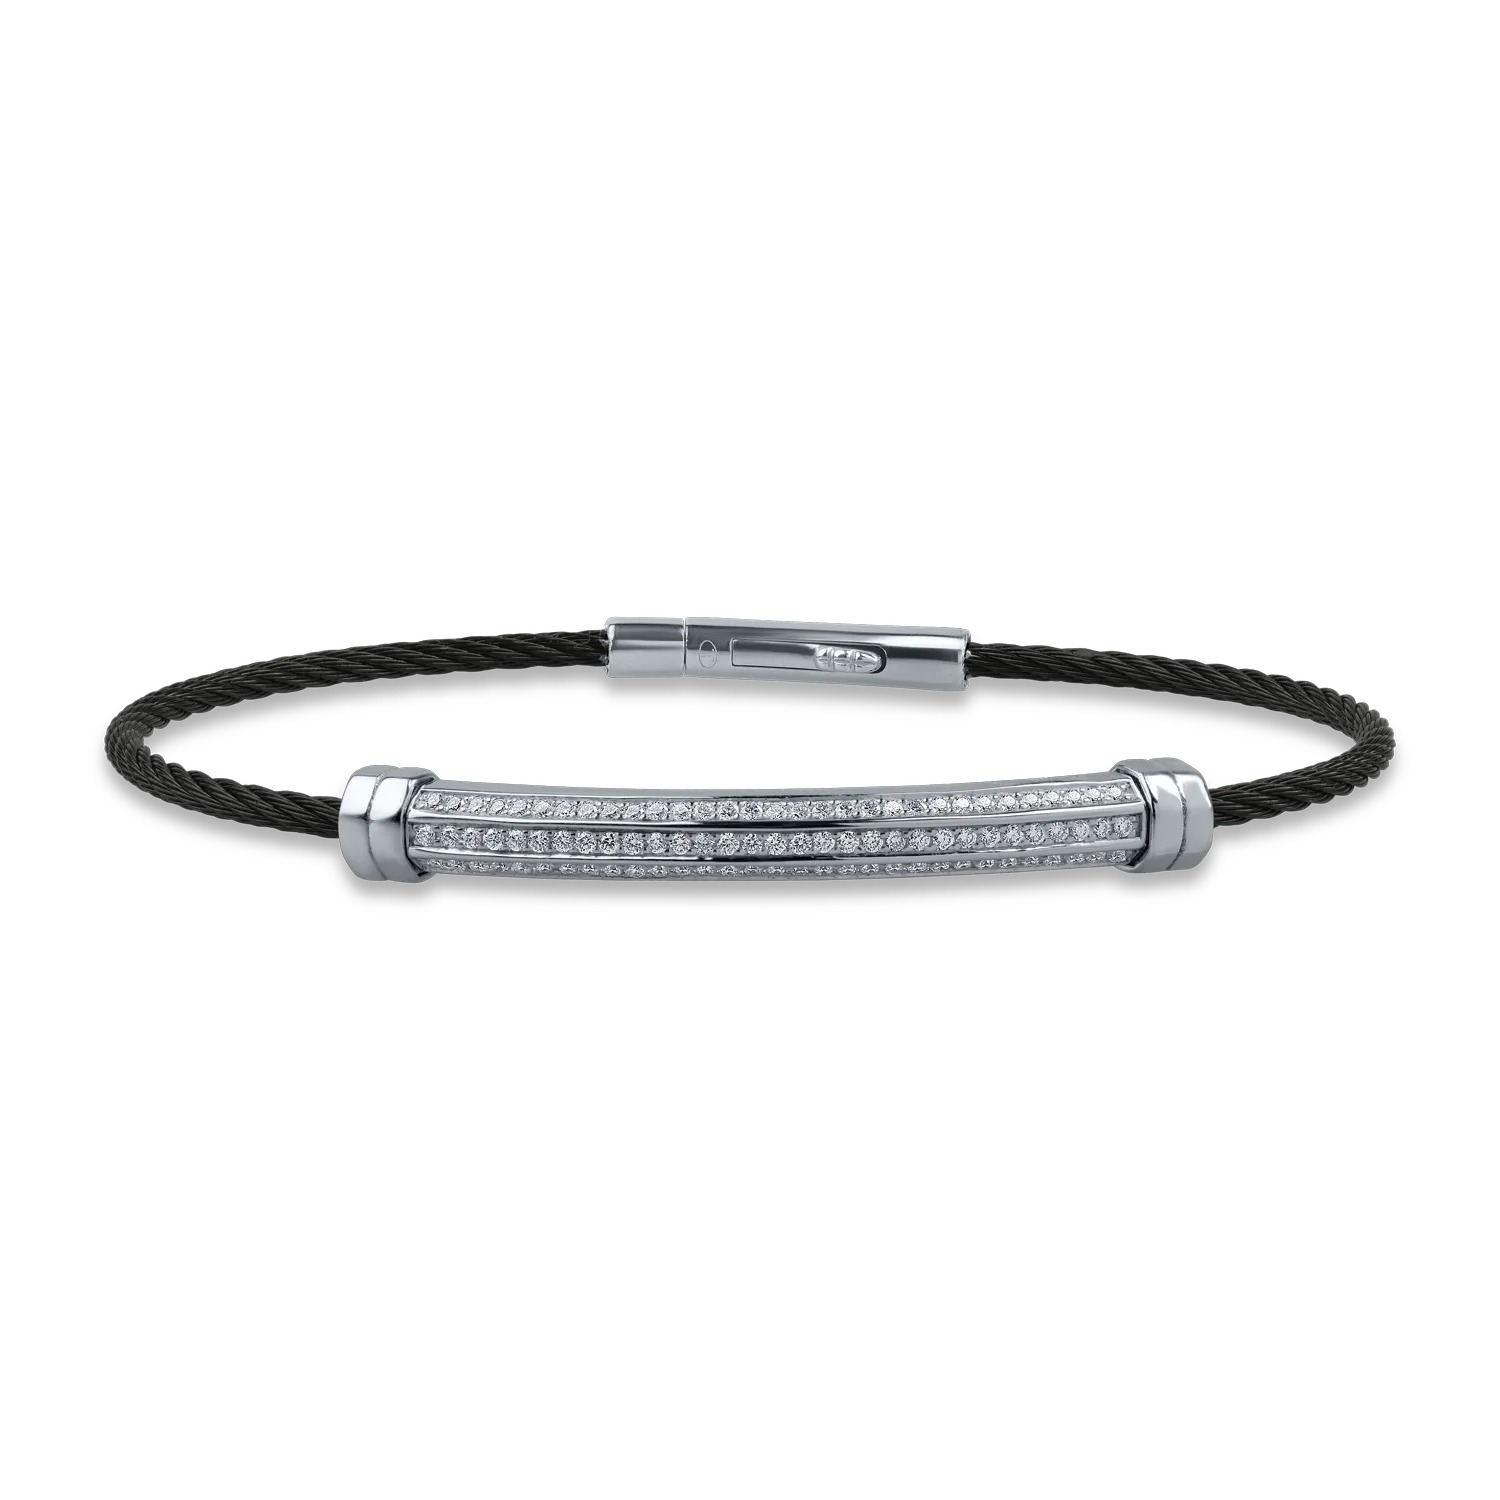 White gold and steel bracelet with 0.45ct diamonds